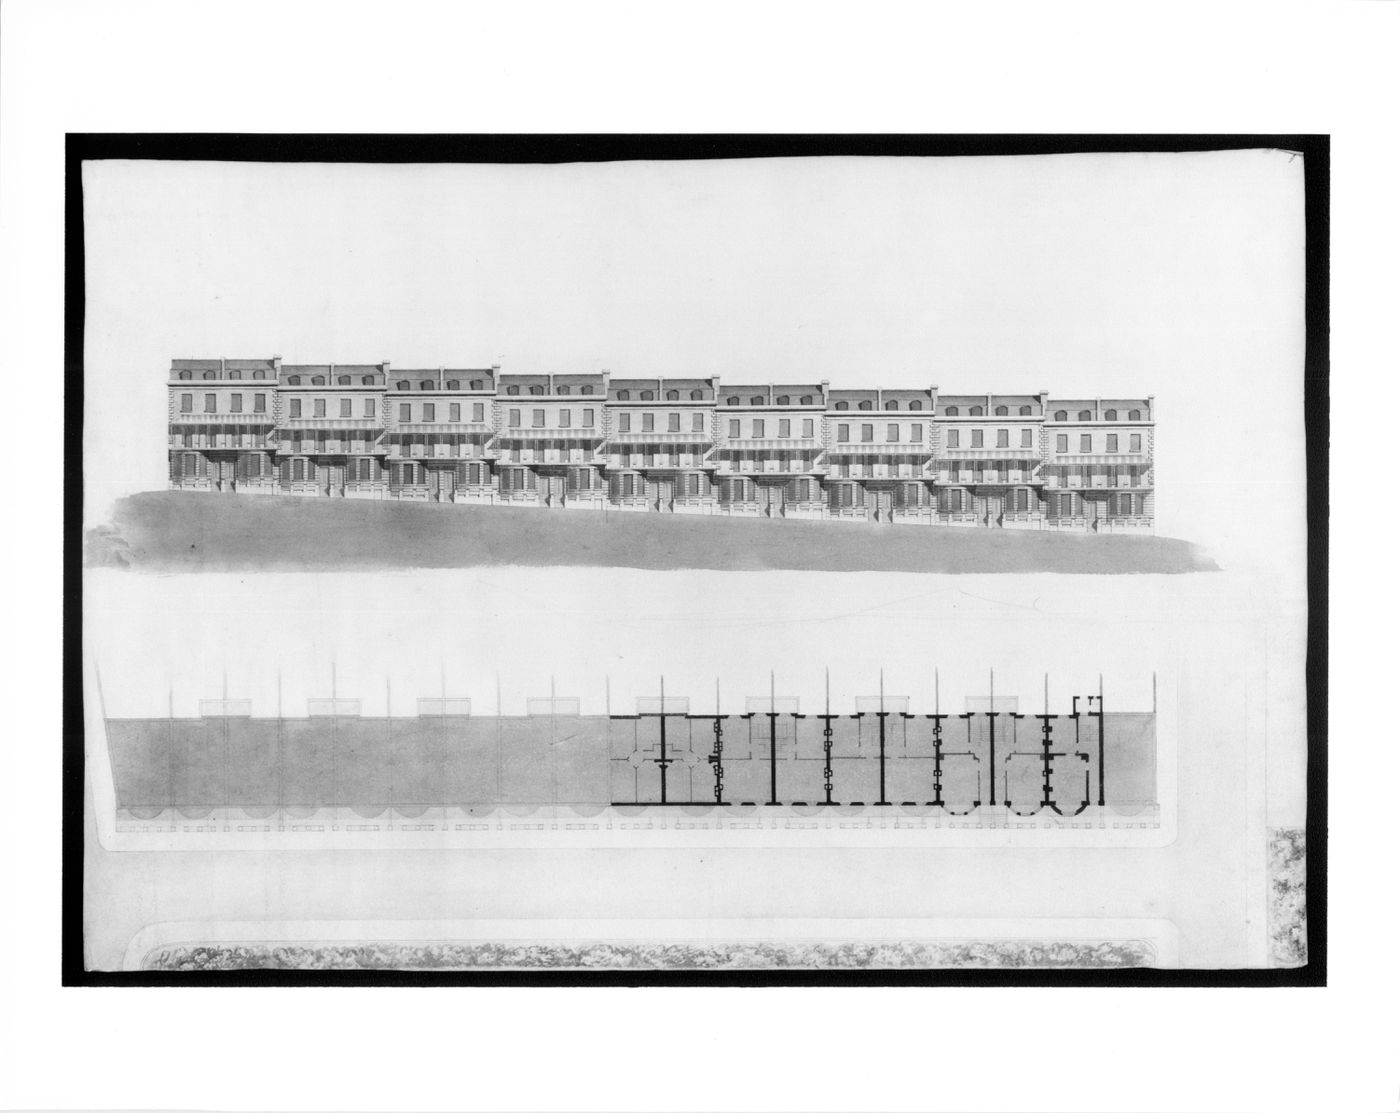 Plan and elevation of terracehousing